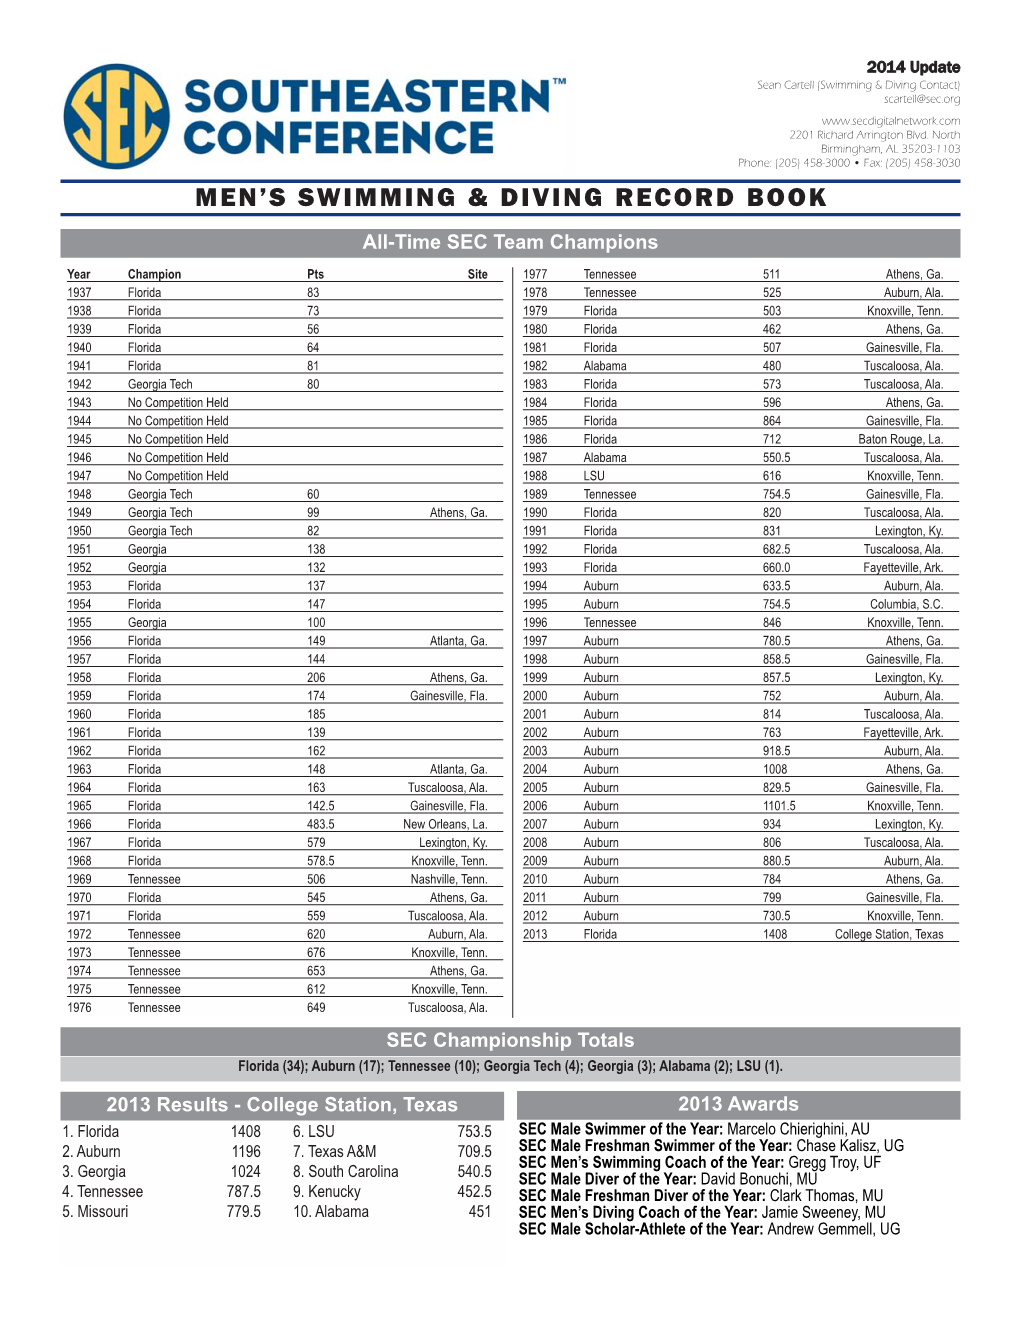 2014 SEC Men's Swimming and Diving Record Book Layout 1